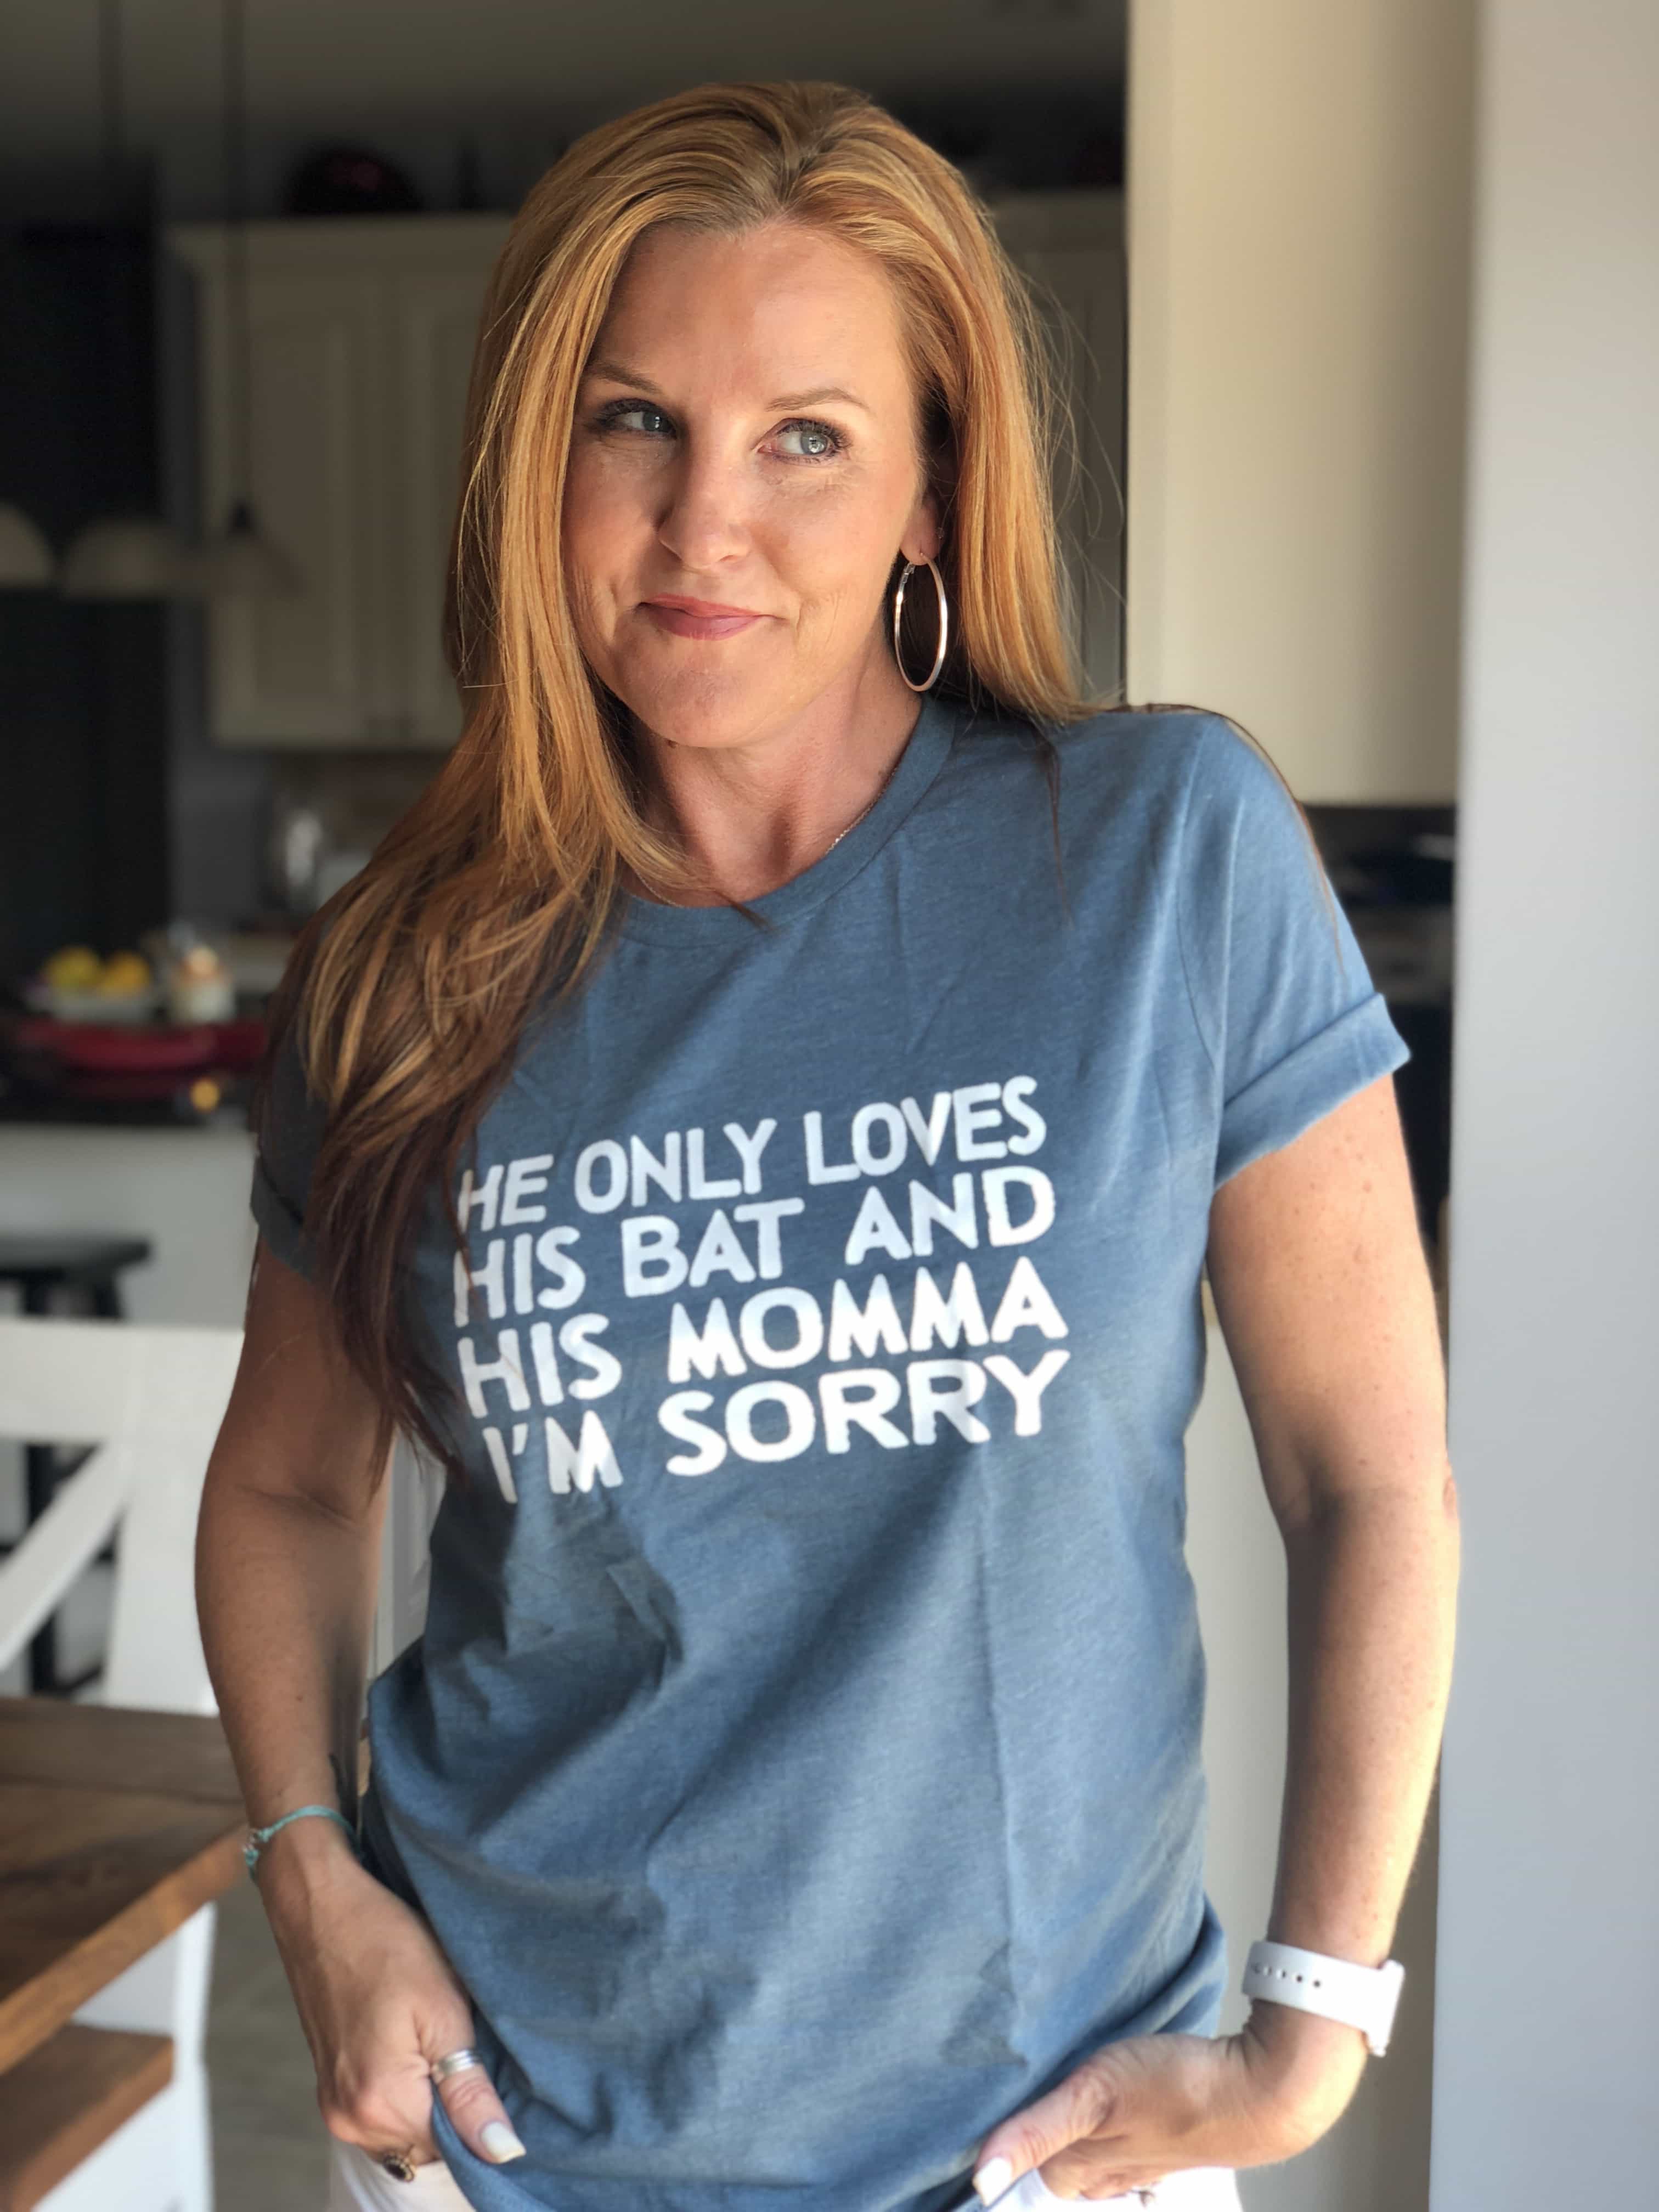 Go Graphic - Why I Love Shirts With a Message - he only loves his bat and his momma, I'm sorry